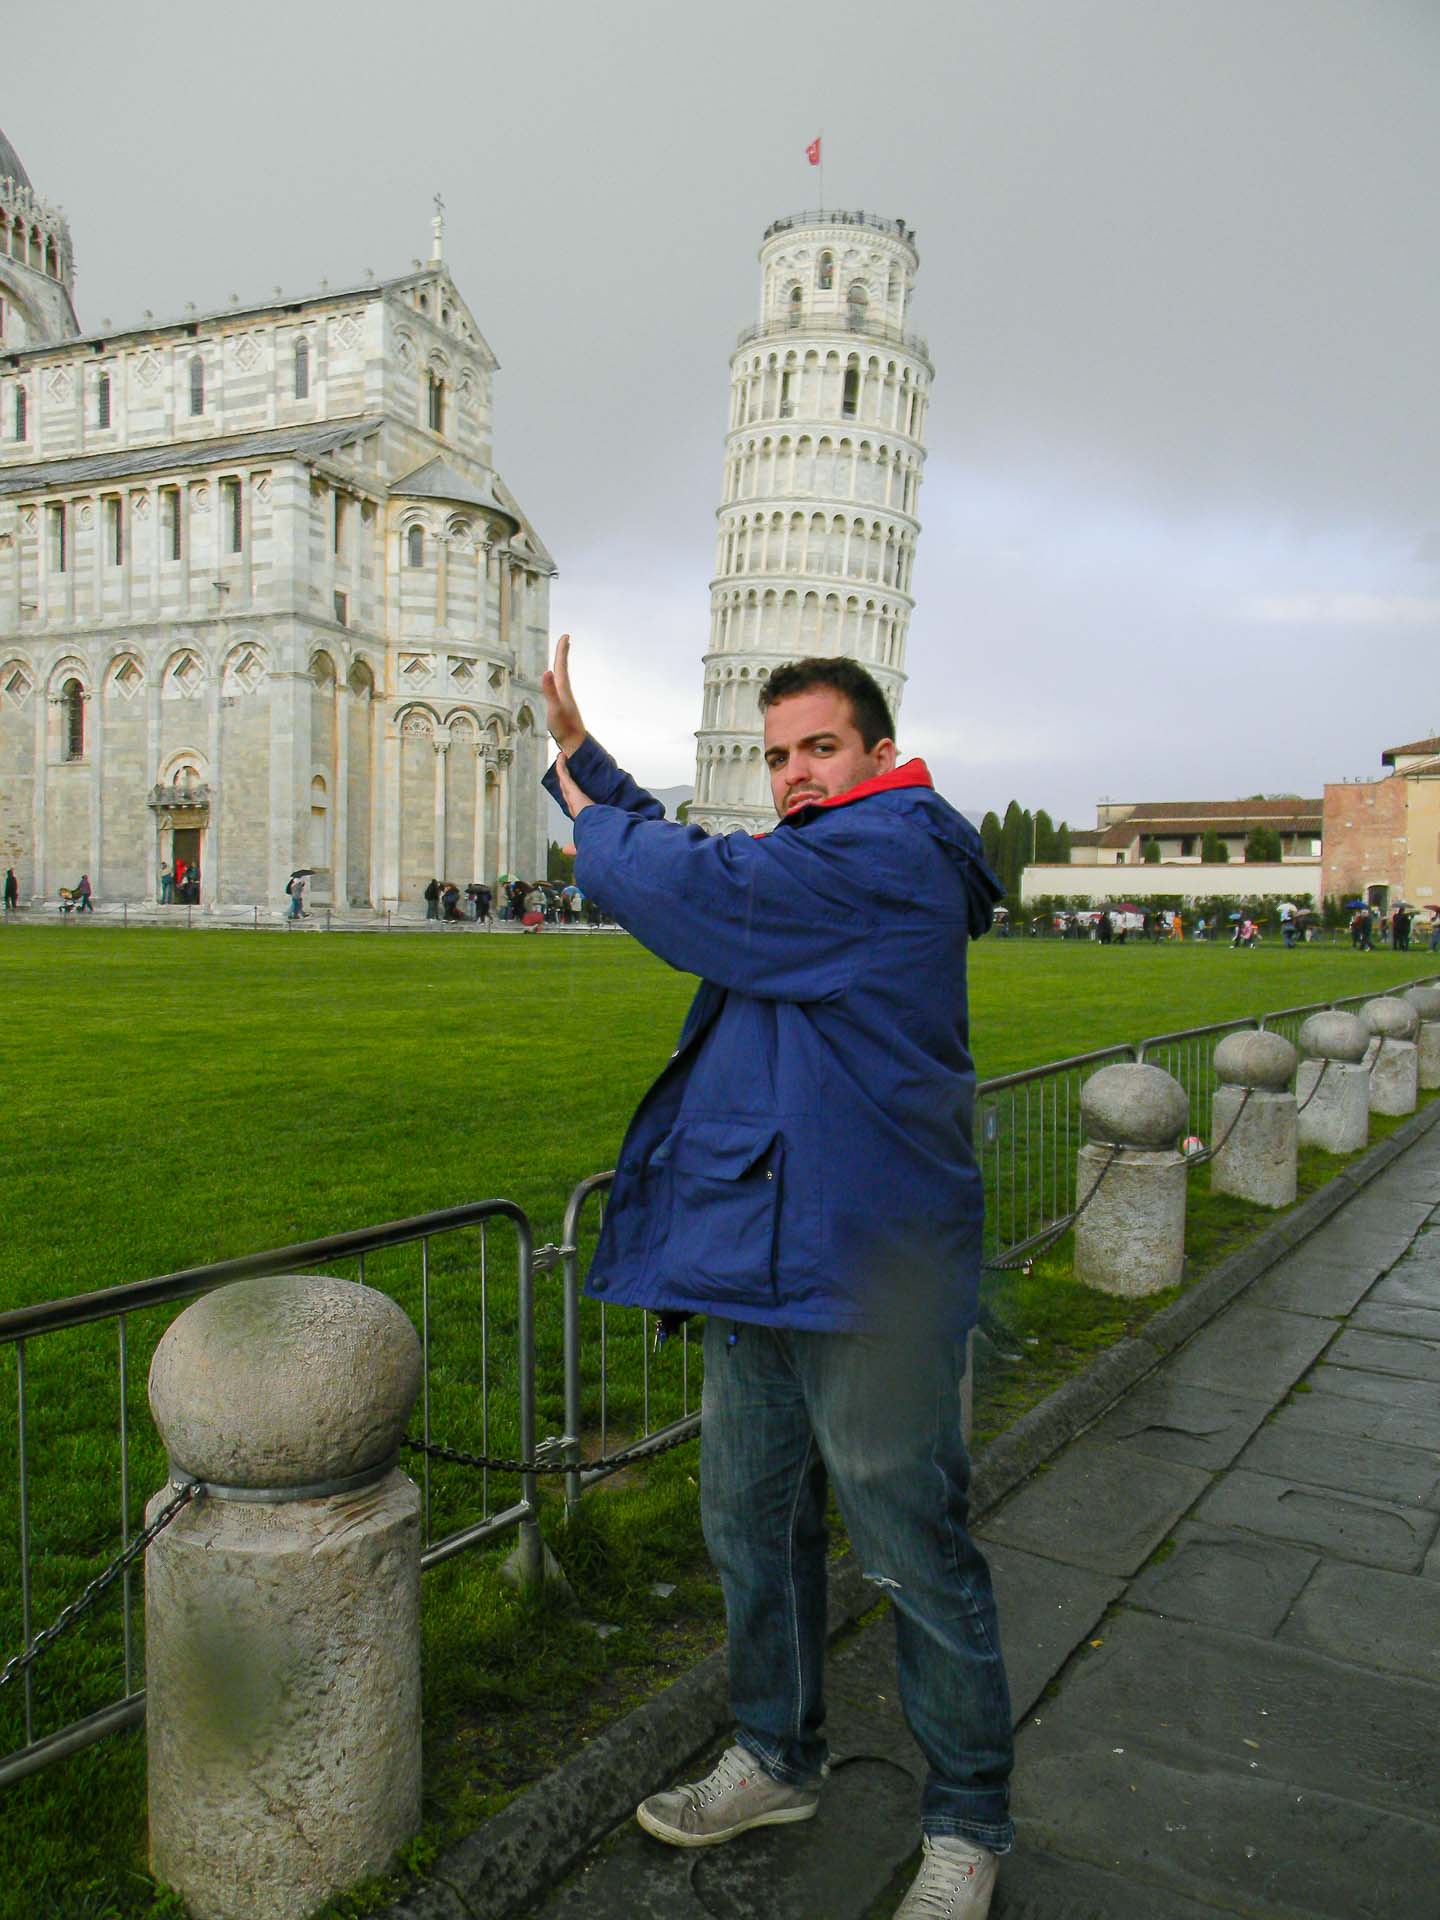 A man trying to hold the Pisa Tower but actually holding the church instead